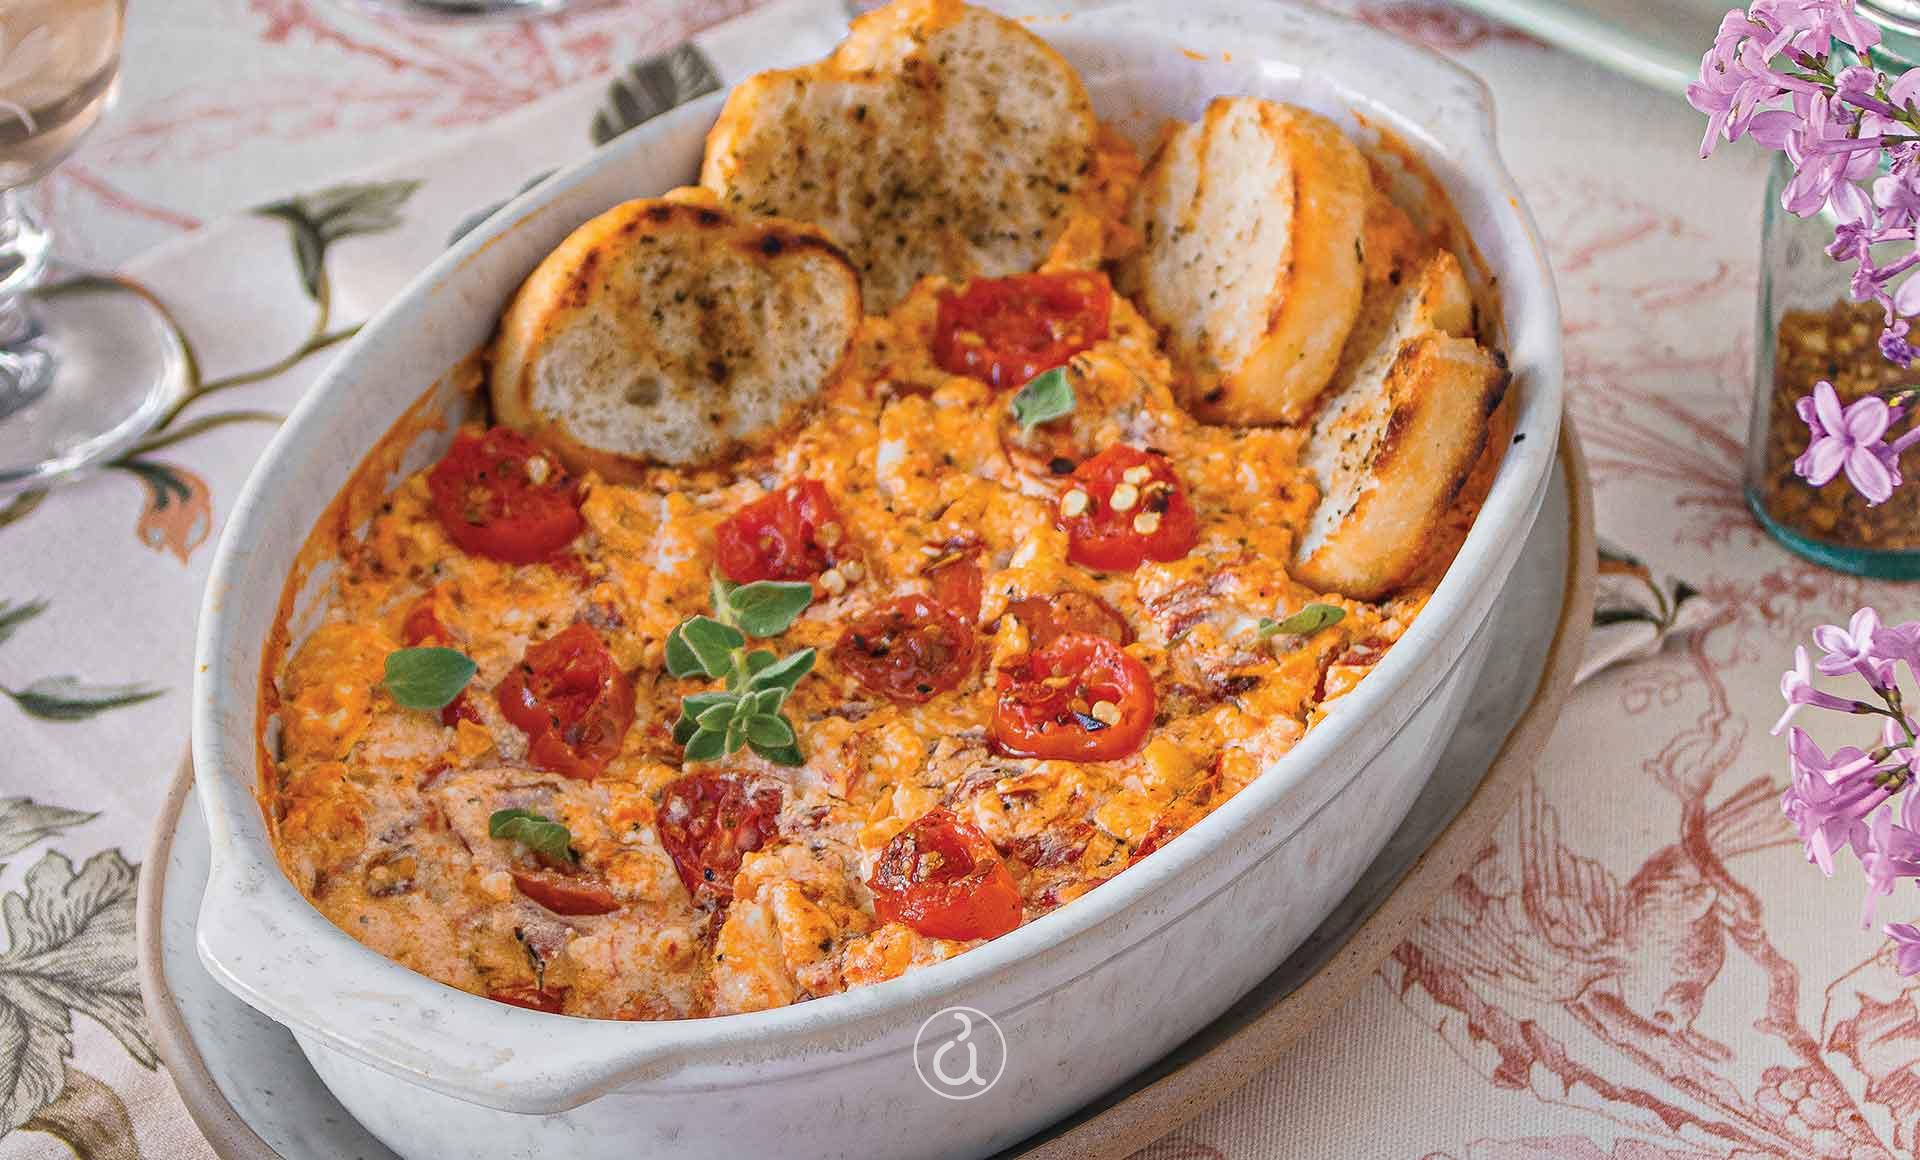 ROTD: Feta Bake with Tomatoes and Peppers